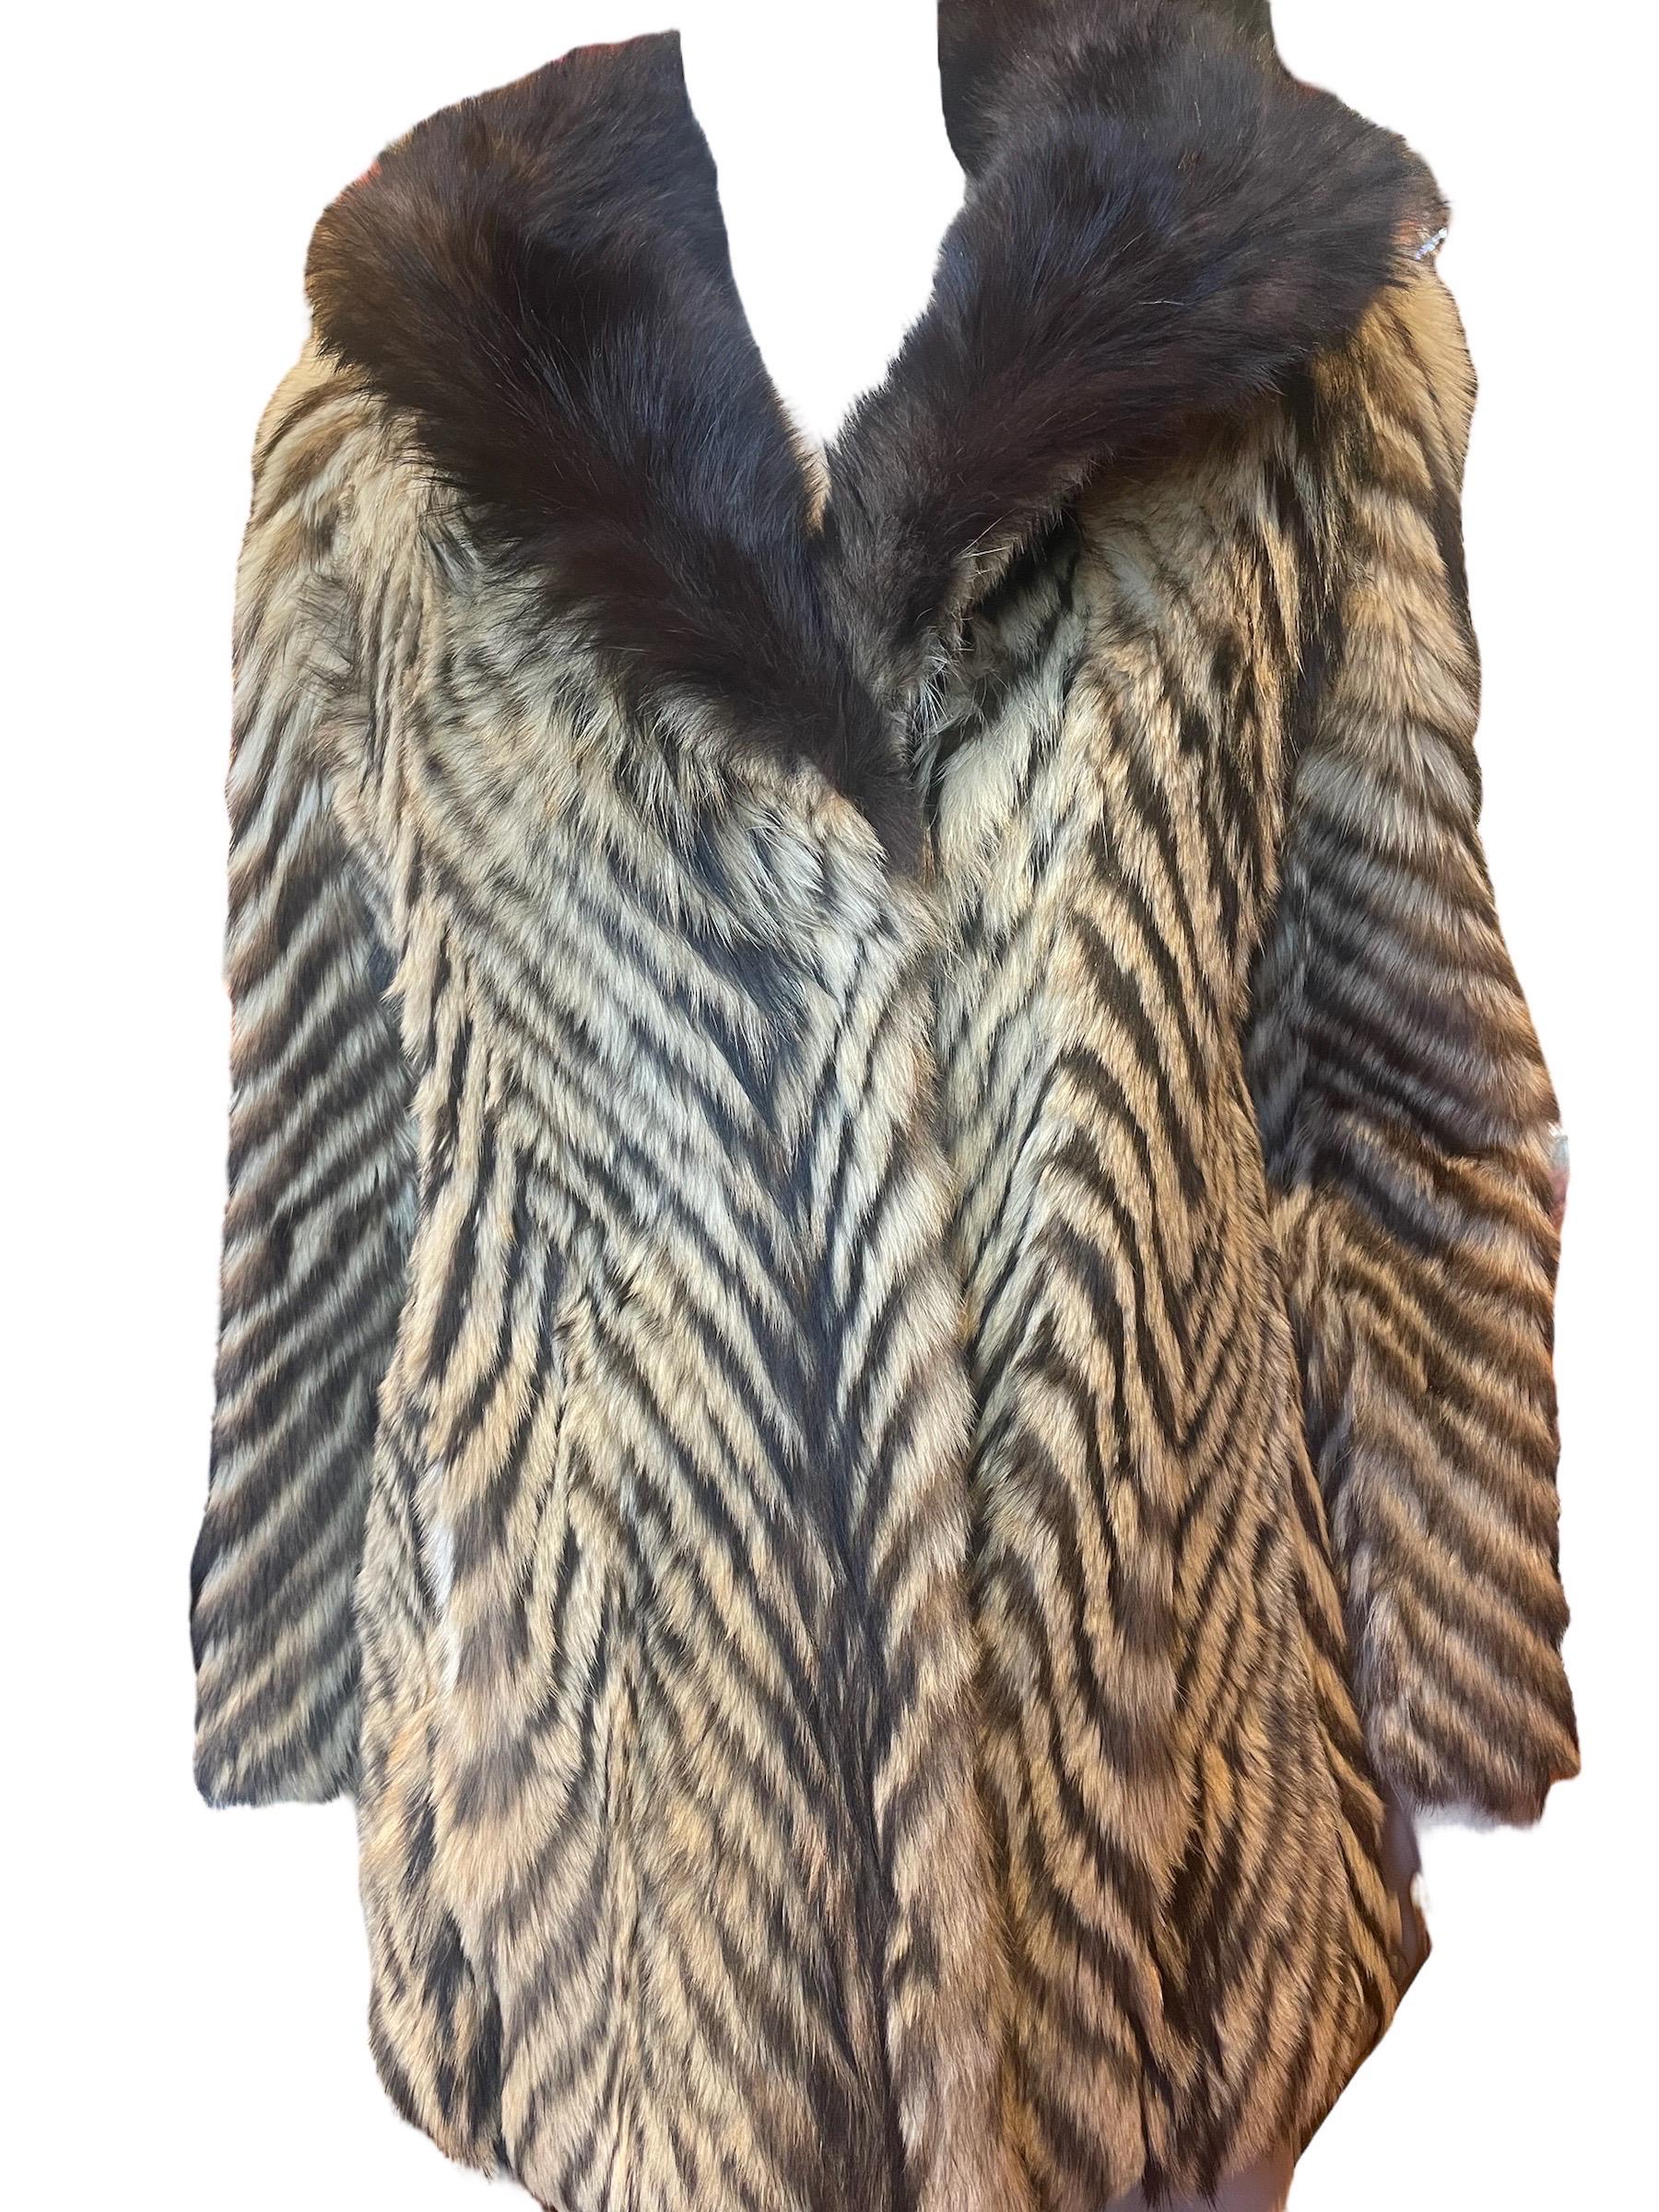 1980s Raccoon Fur Jacket With Dyed Fur Stripes

An awesome 1980s fur jacket with stripes.  


